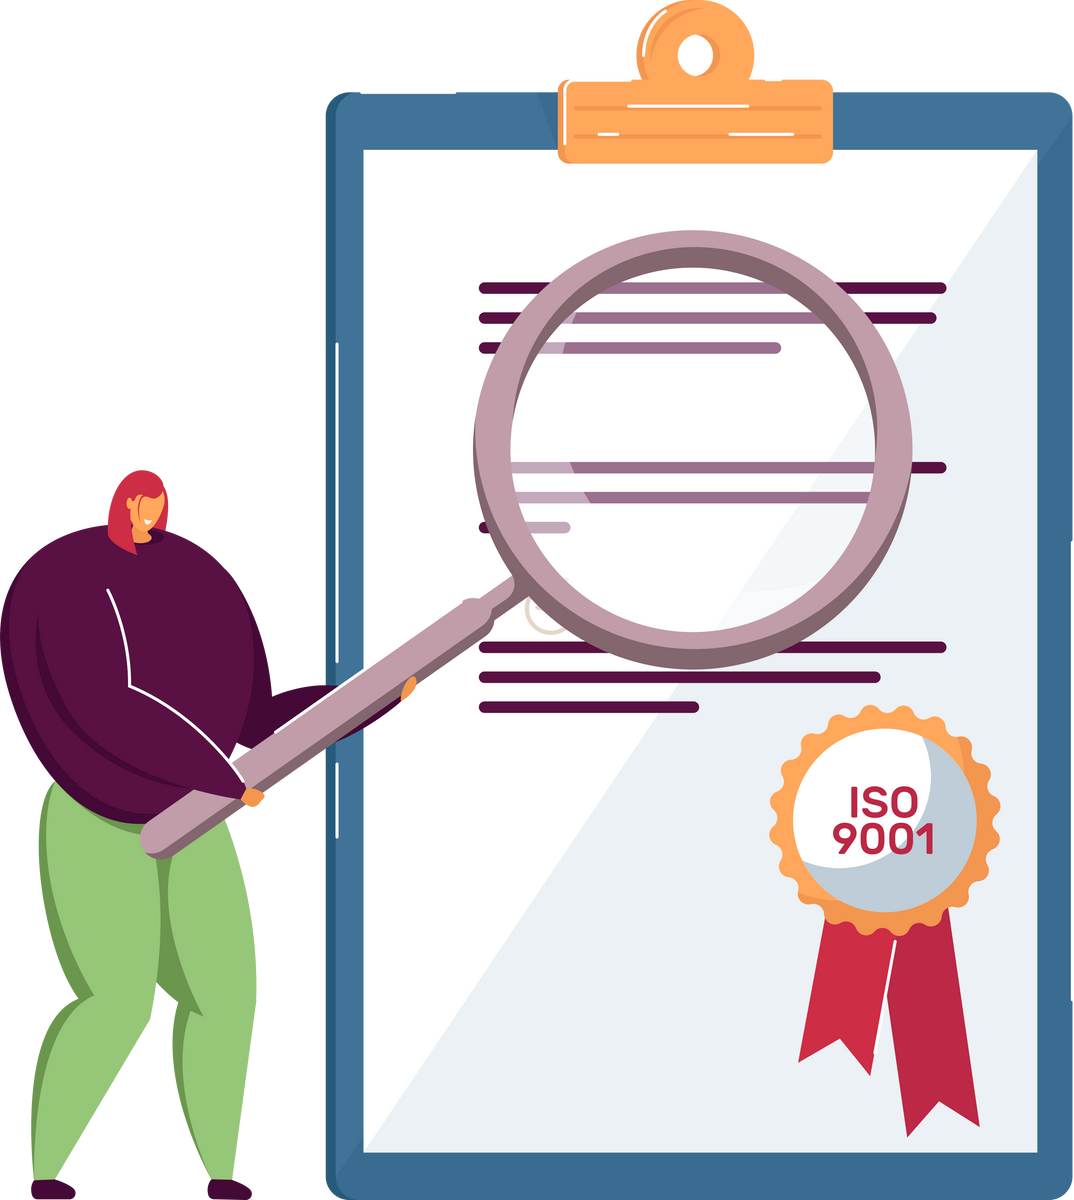 Tiny people with quality control certificate. Cartoon person checking document flat vector illustration. Quality management system, ISO 9001 standard concept for banner, website design